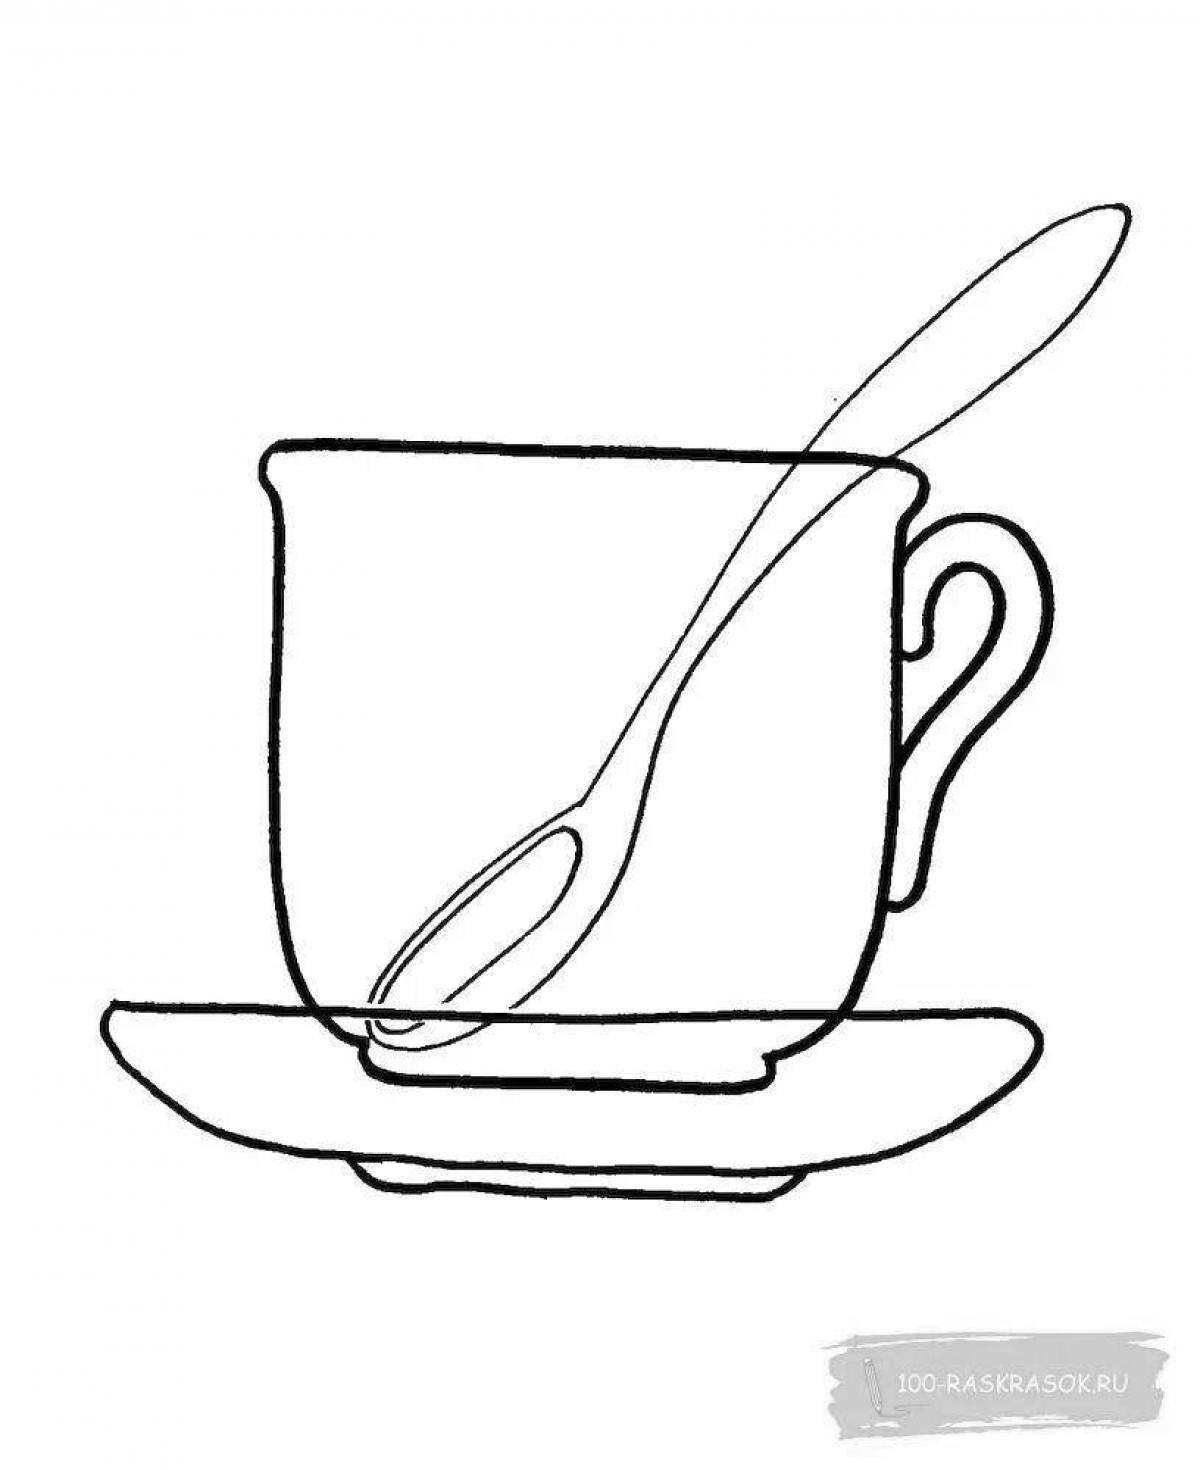 Delightful mug and saucer coloring book for kids